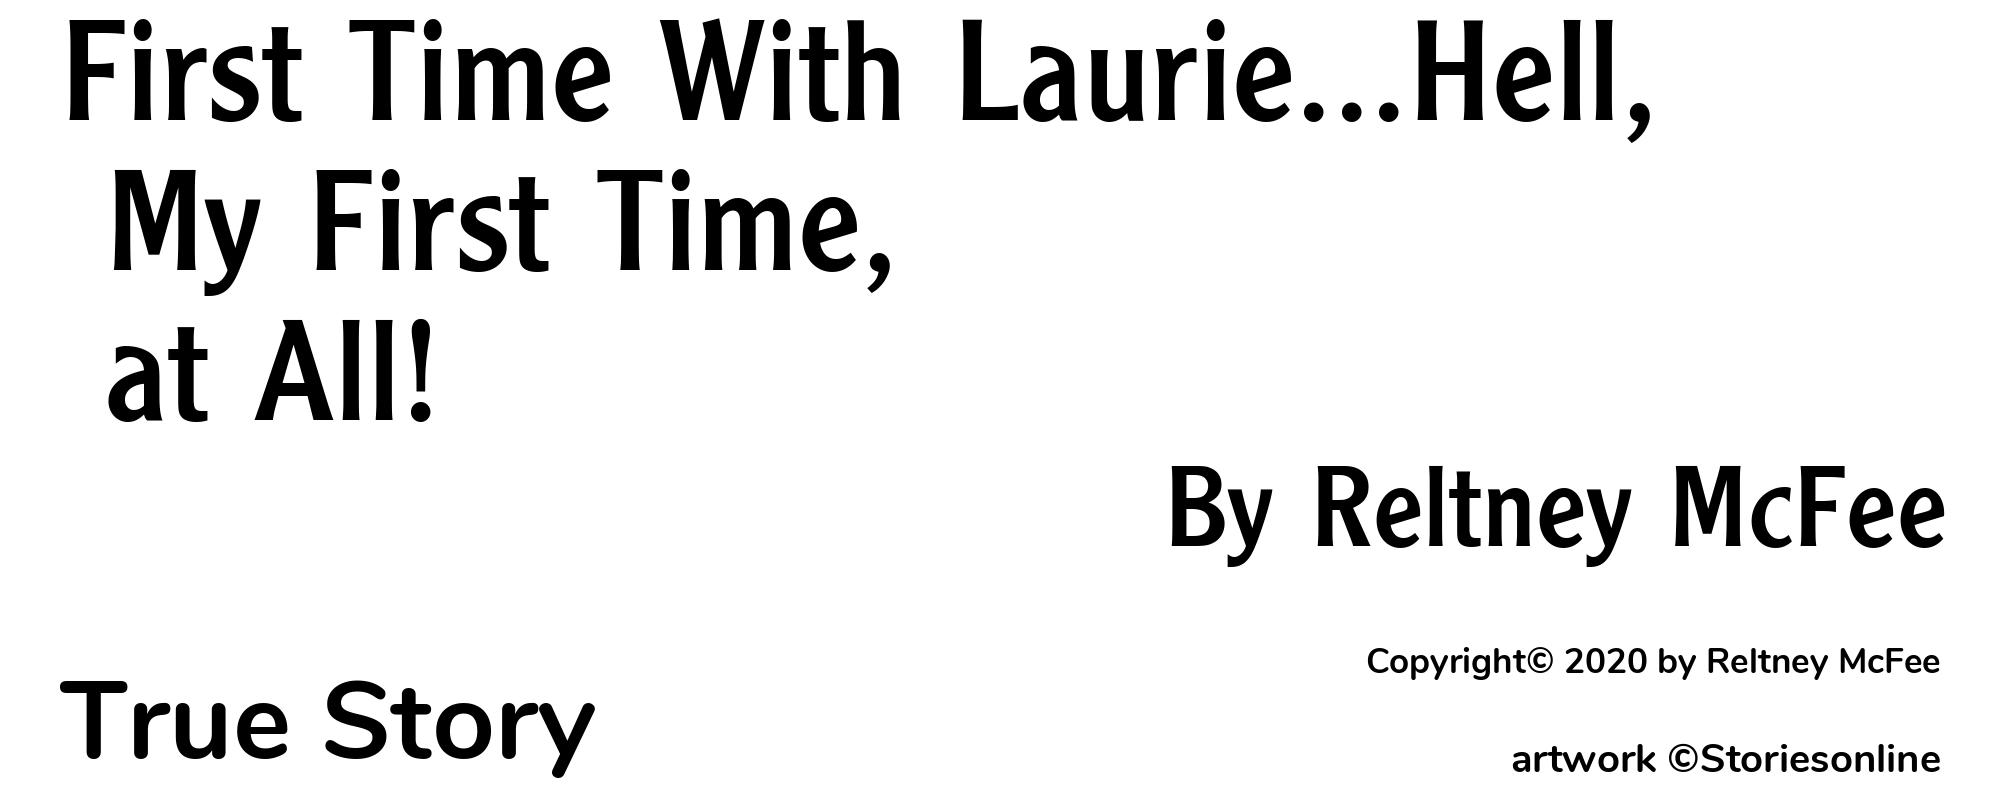 First Time With Laurie...Hell, My First Time, at All! - Cover